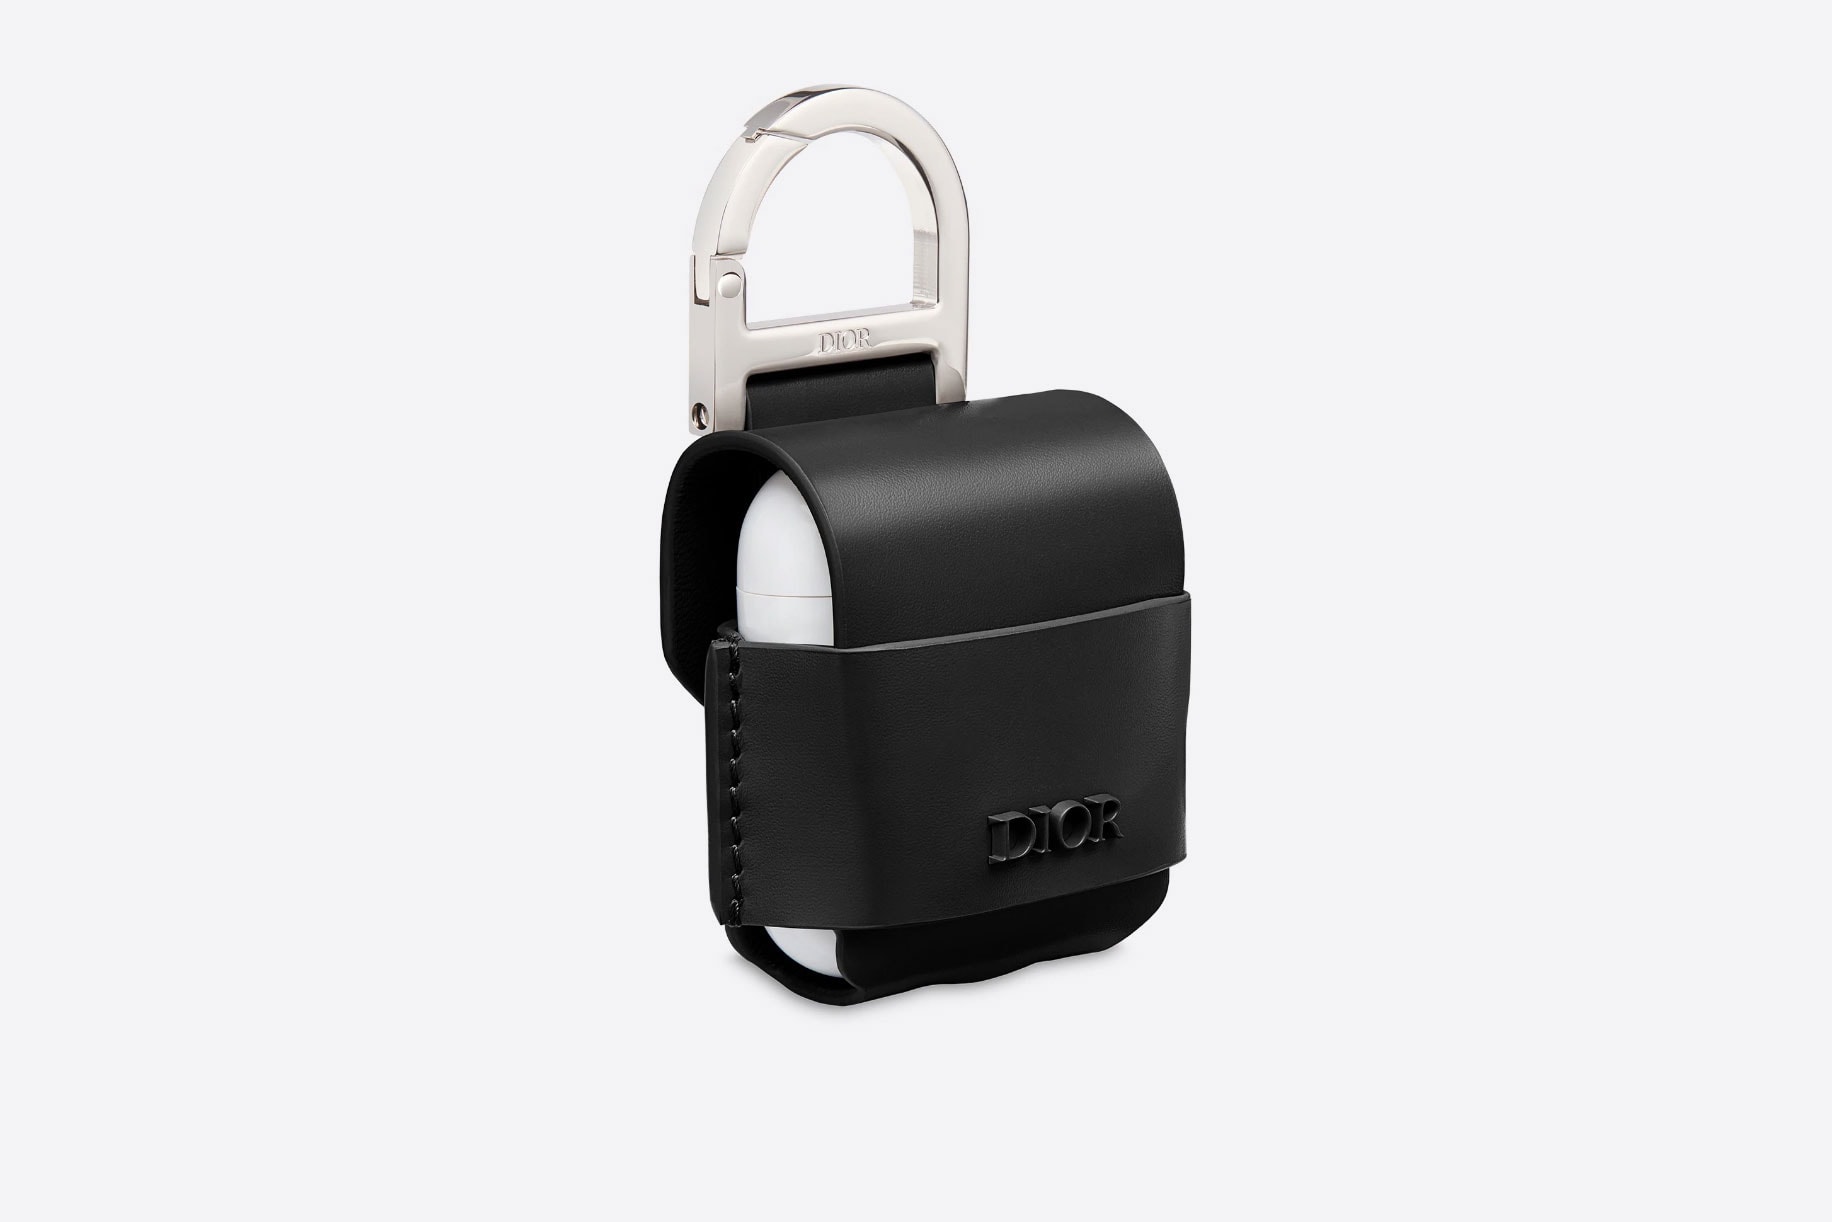 Dior Apple AirPods Cases black grey accessories tech devices bags 350 usd